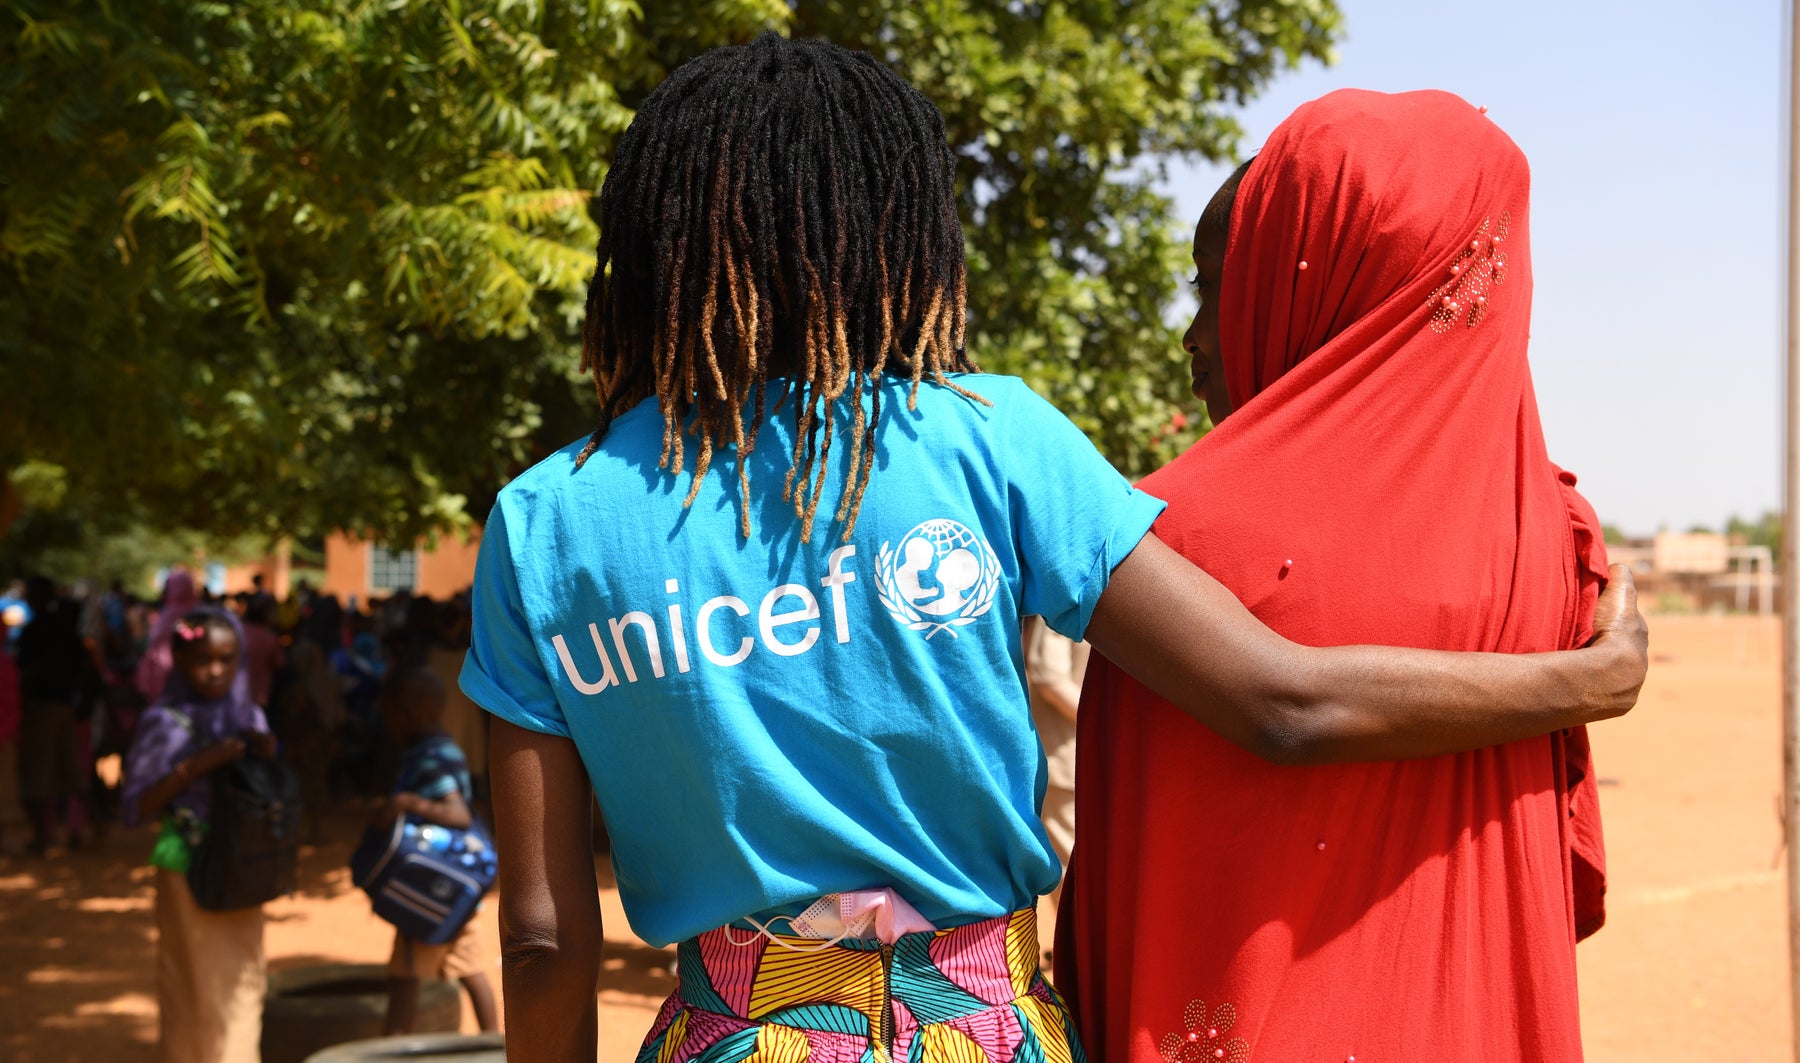 Patricia Safi Lombo, Chief of Education UNICEF Niger, supports a girl at the Yantala school in Niamey, the capital of Niger.